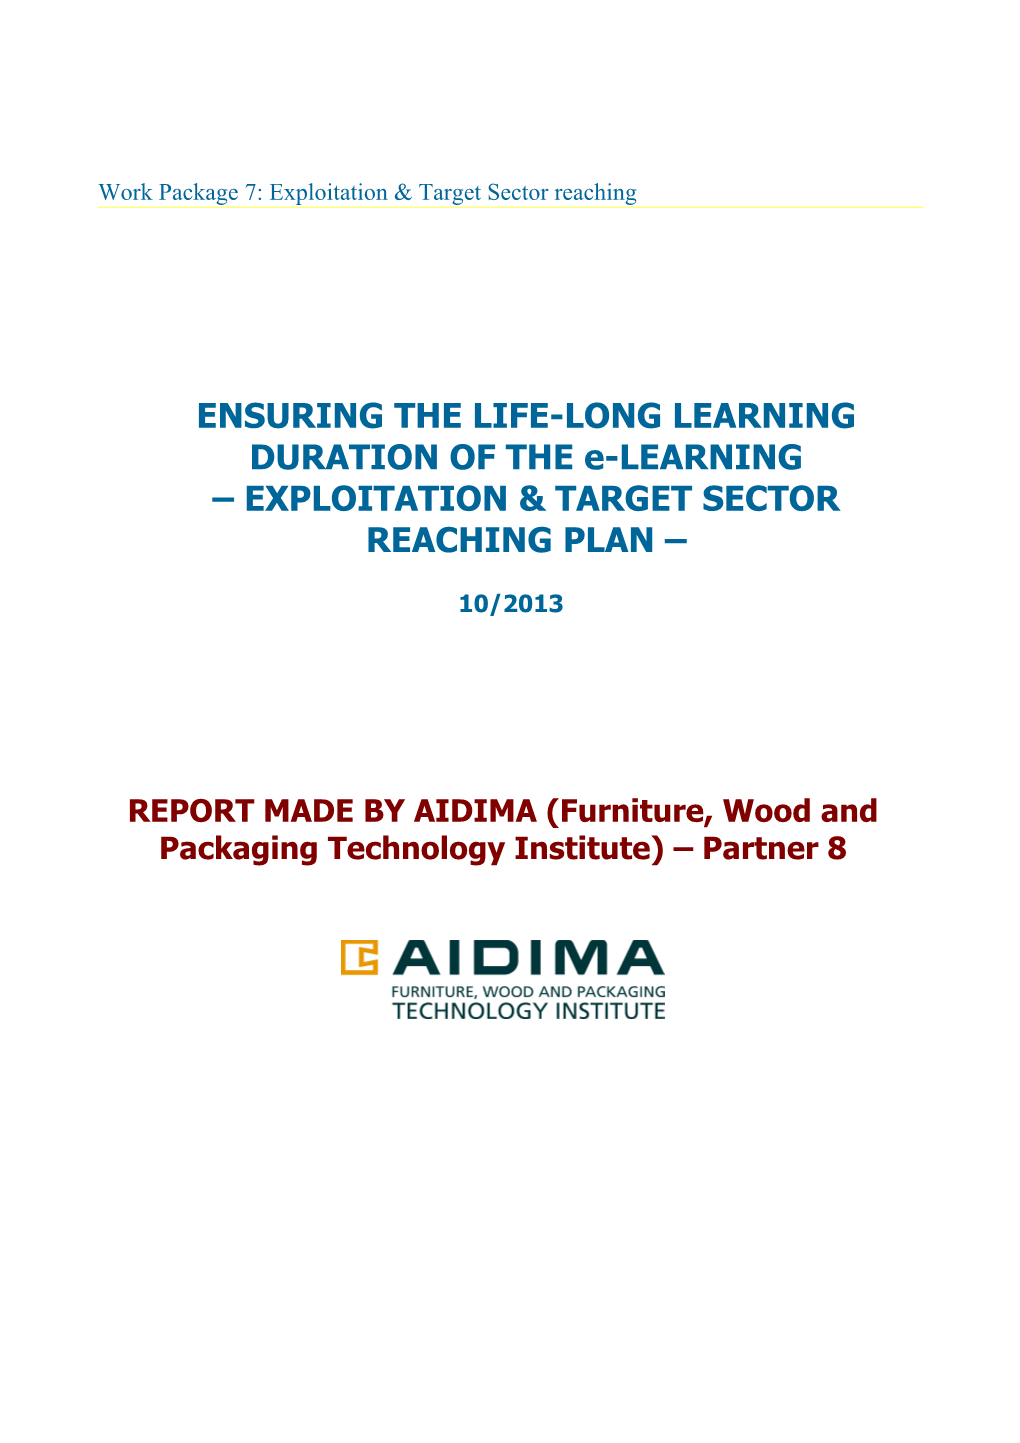 ENSURING the LIFE-LONG LEARNING DURATION of the E-LEARNING